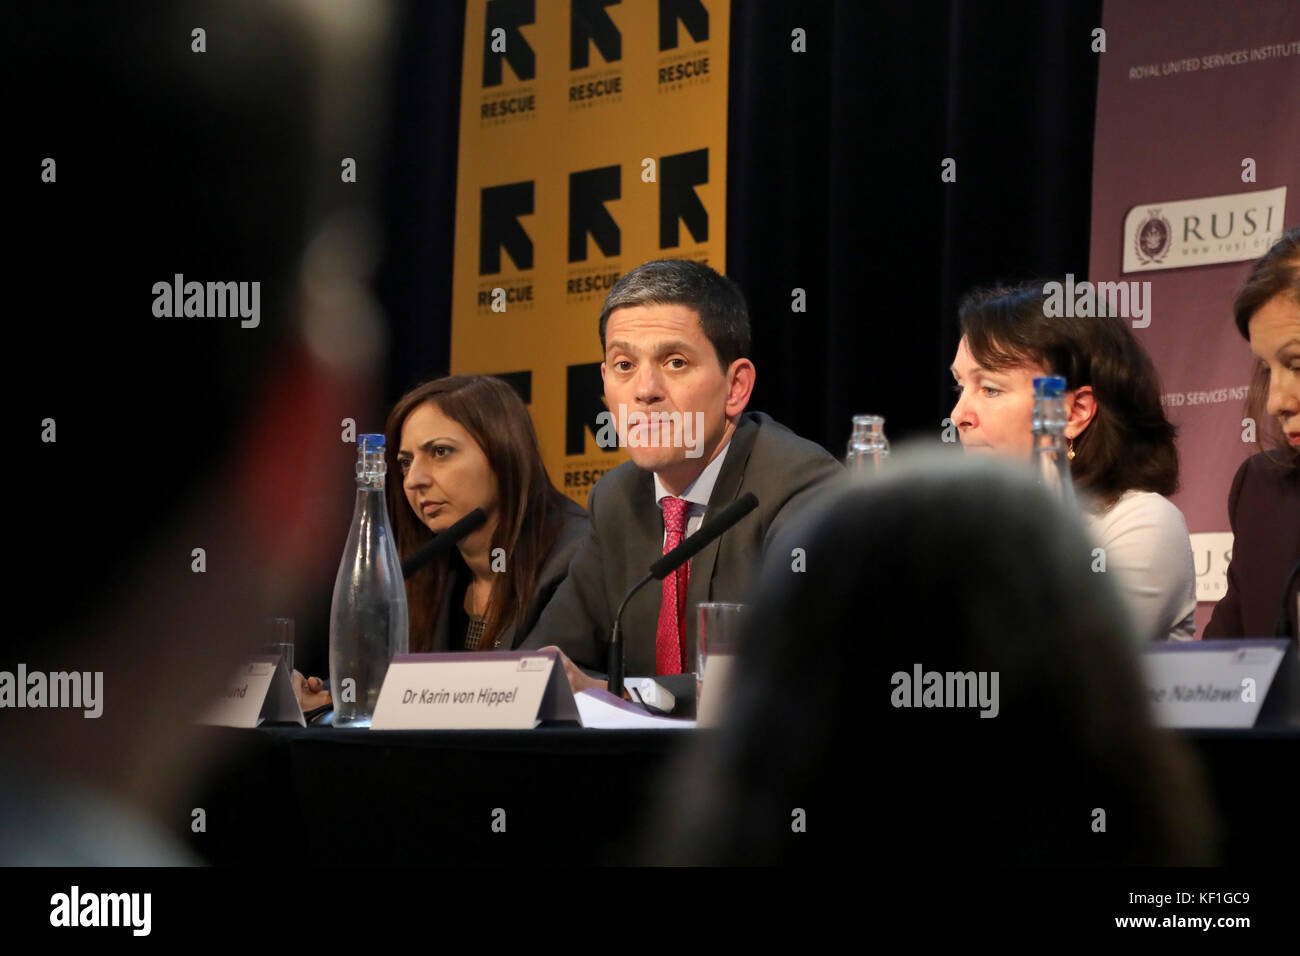 London, UK. 25th October, 2017. David Miliband, chief executive of the International Rescue Committee (IRC) and former UK foreign secretary, speaking at the RUSI think-tank in London about the Syrian conflict, on 25 October 2017. Credit: Dominic Dudley/Alamy Live News Stock Photo